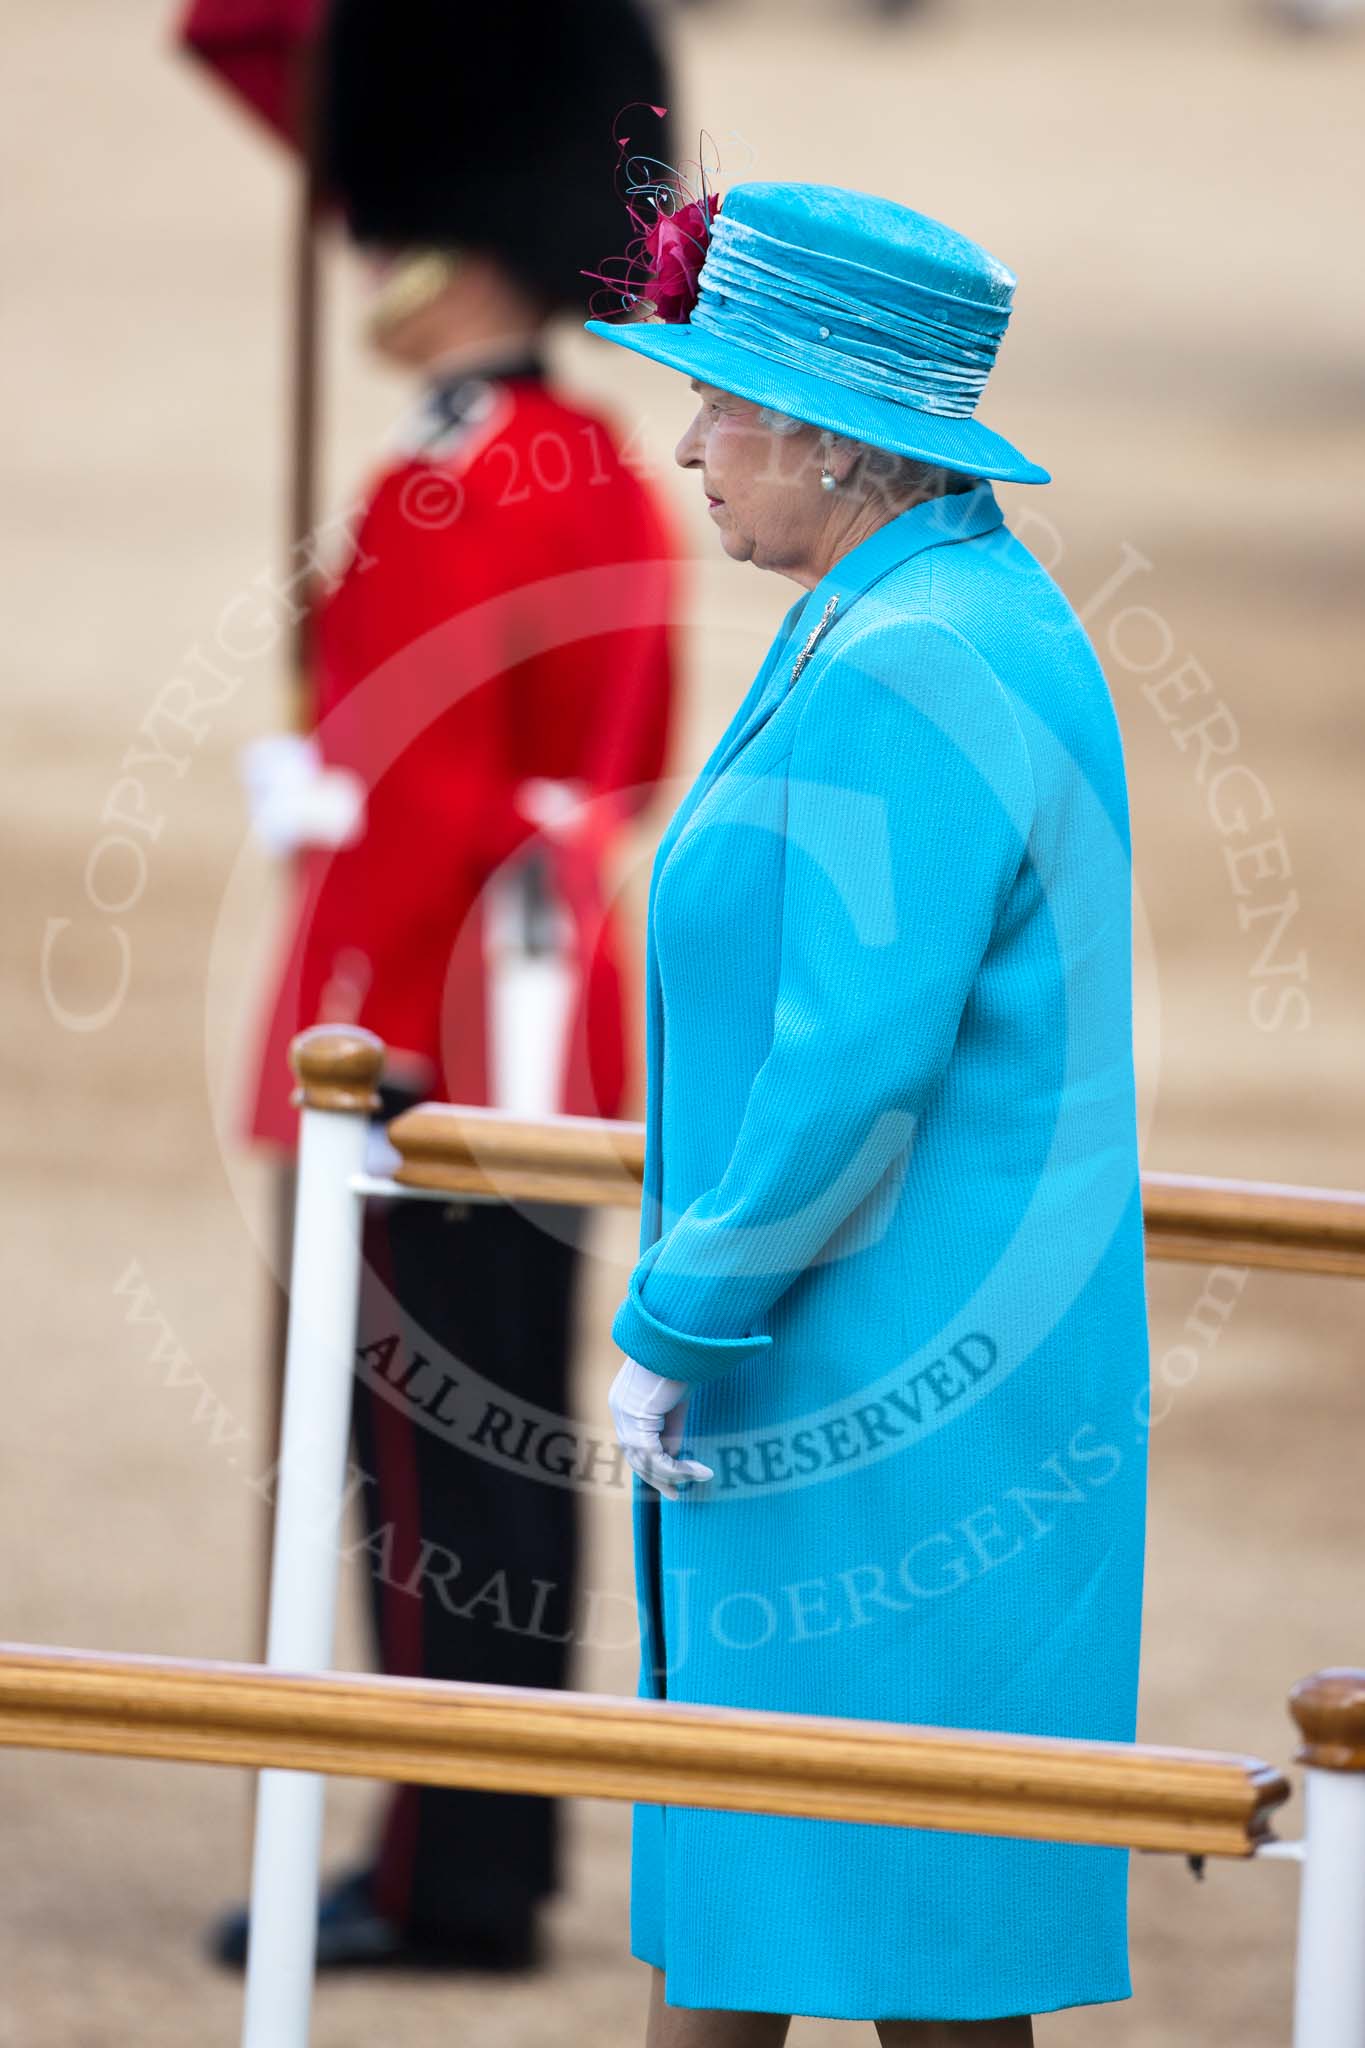 Trooping the Colour 2009: HM The Queen standing on the saluting base whilst the National Anthem is played..
Horse Guards Parade, Westminster,
London SW1,

United Kingdom,
on 13 June 2009 at 10:58, image #126